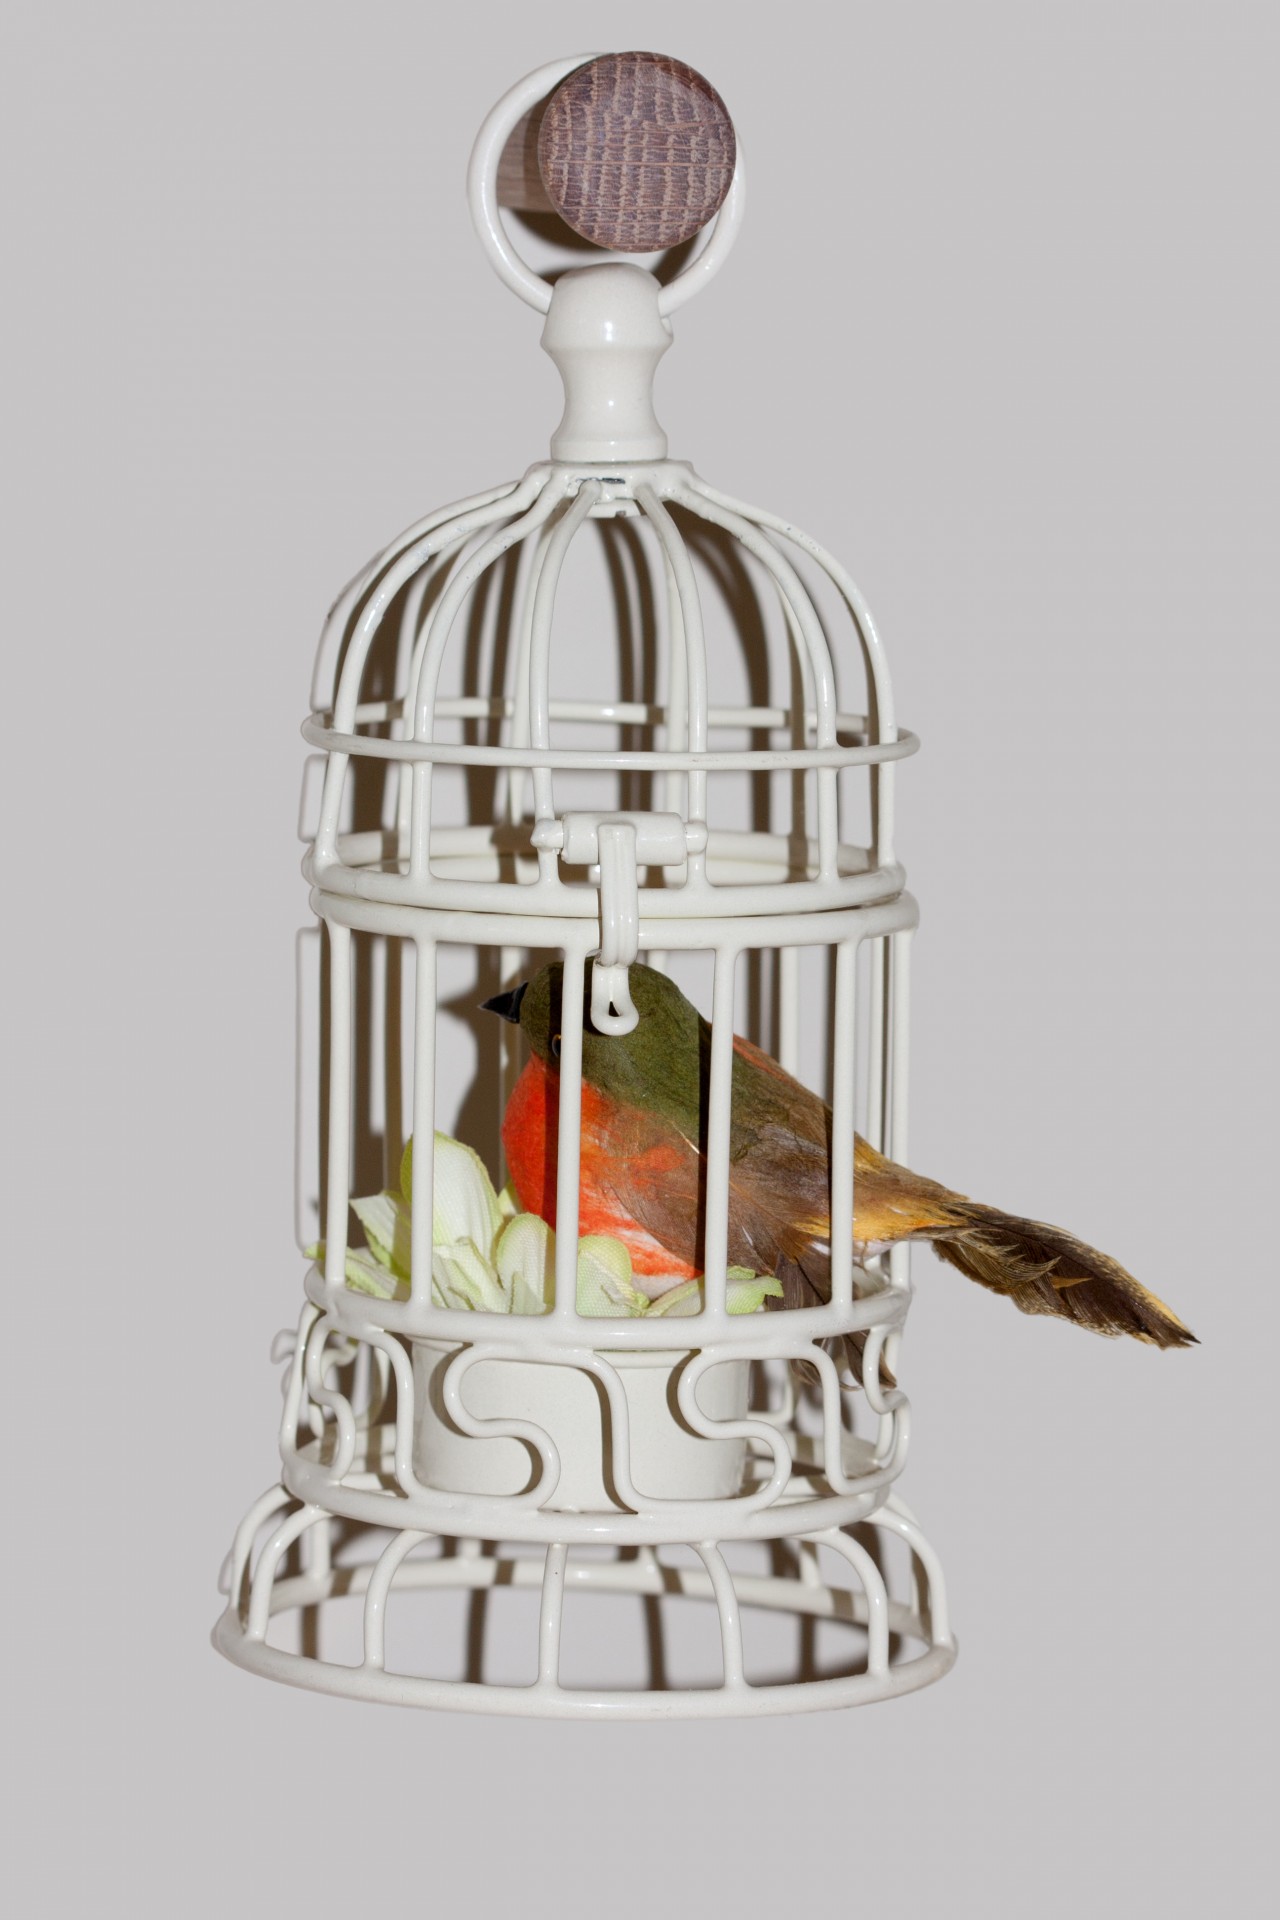 bird-in-cage-free-stock-photo-public-domain-pictures